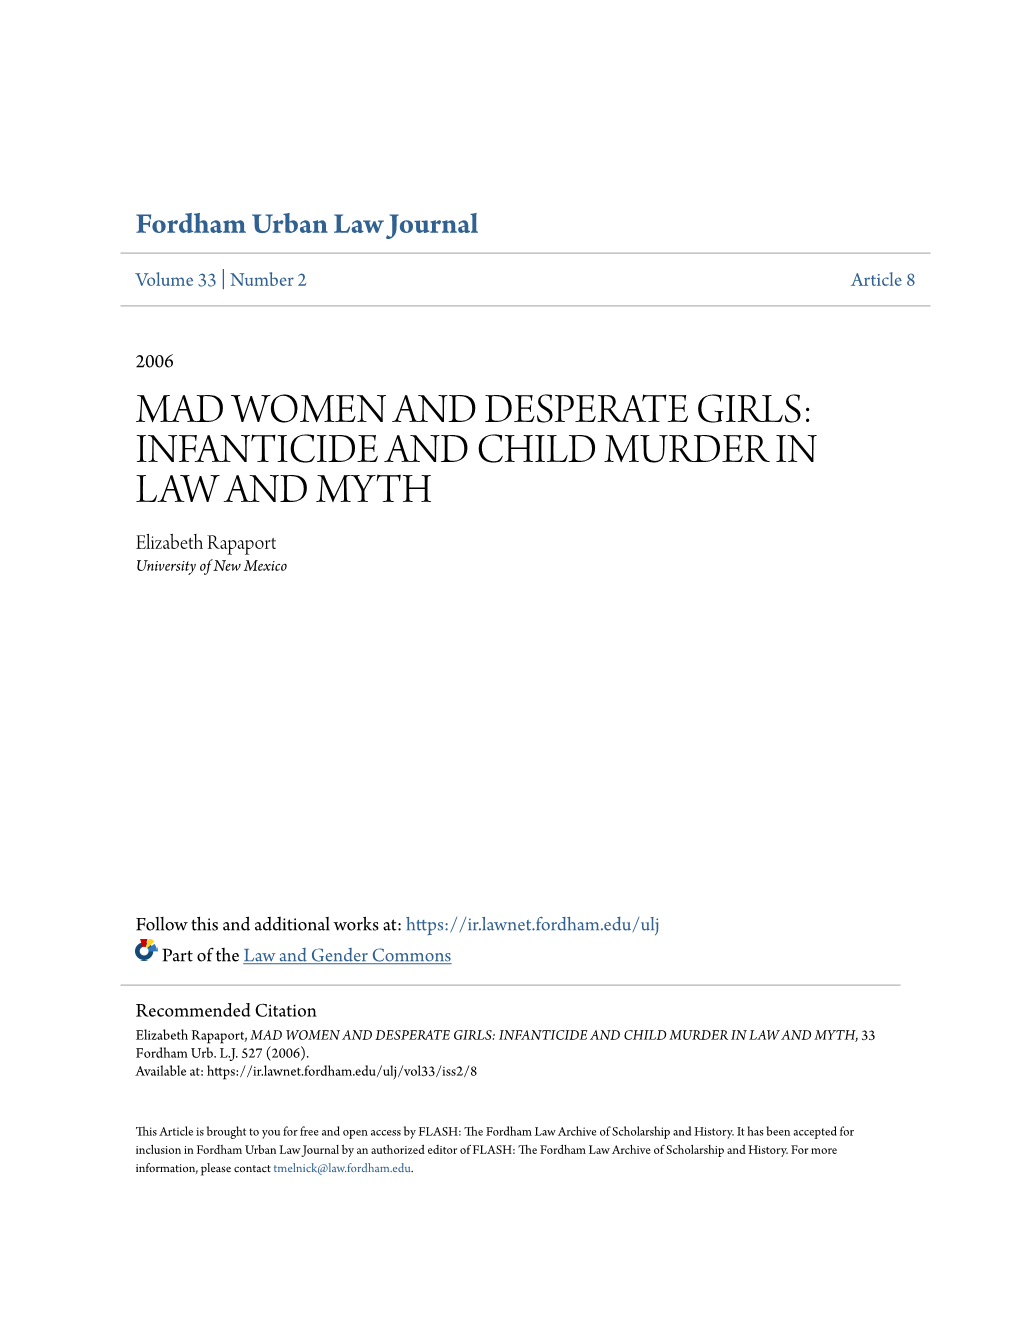 INFANTICIDE and CHILD MURDER in LAW and MYTH Elizabeth Rapaport University of New Mexico